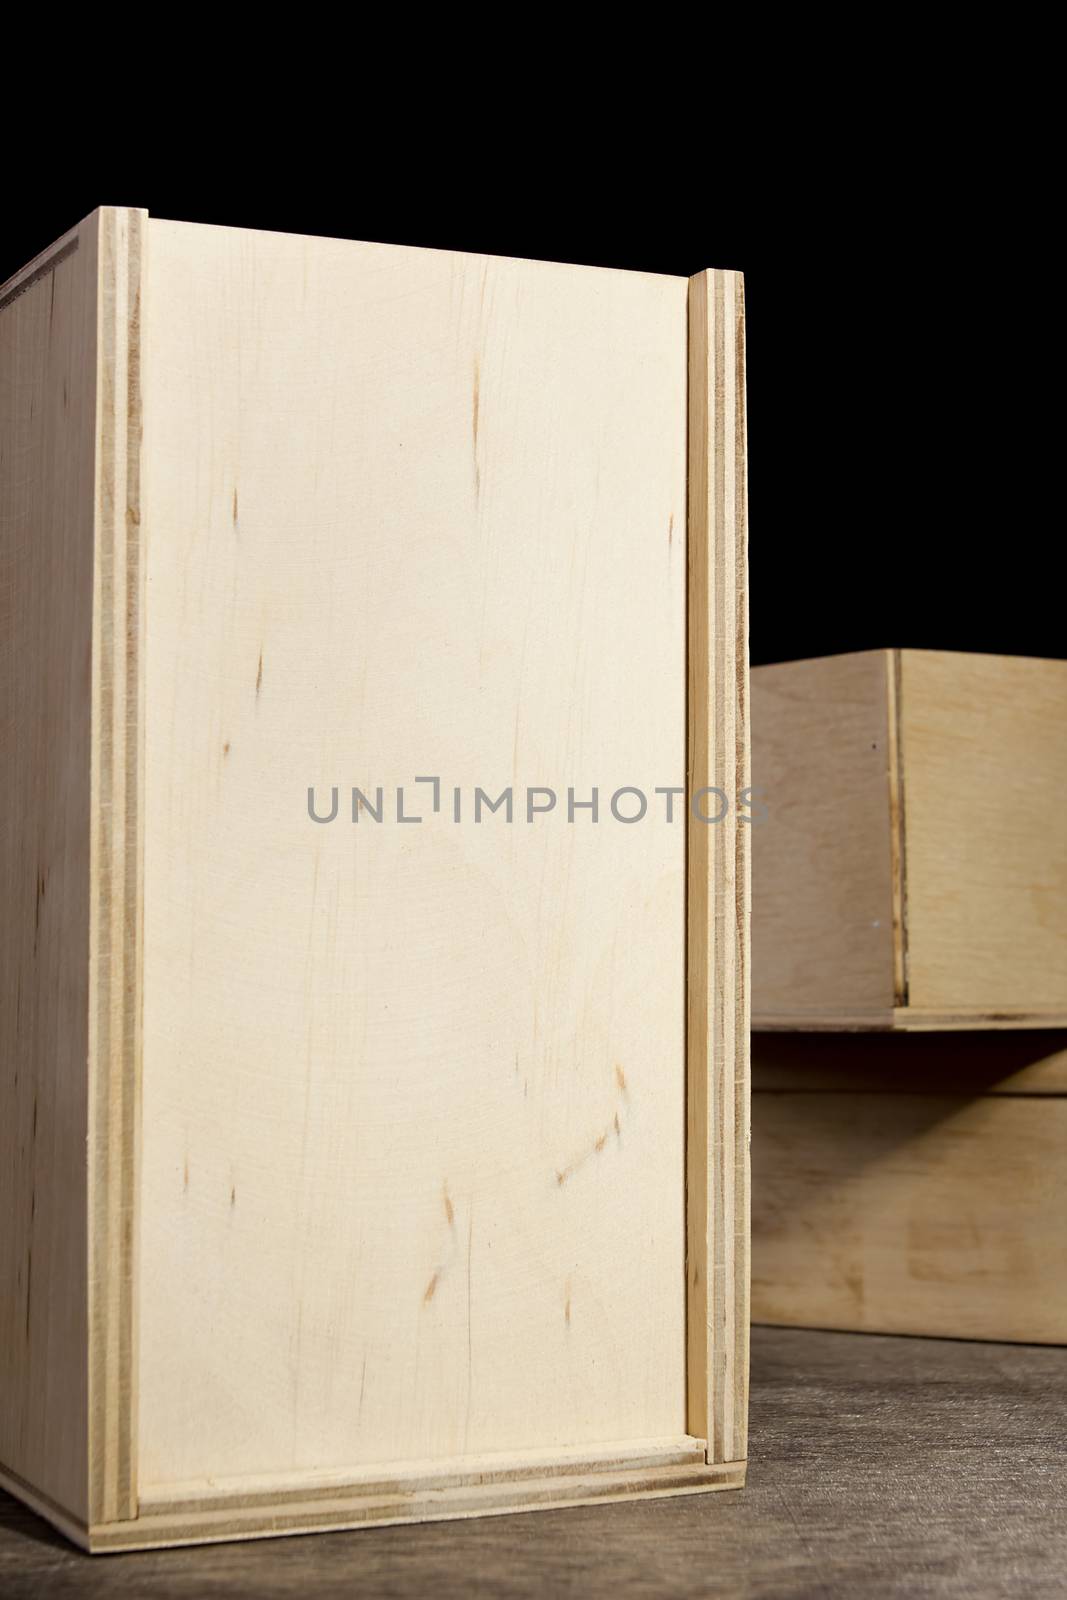 Light wooden boxes on a dark background